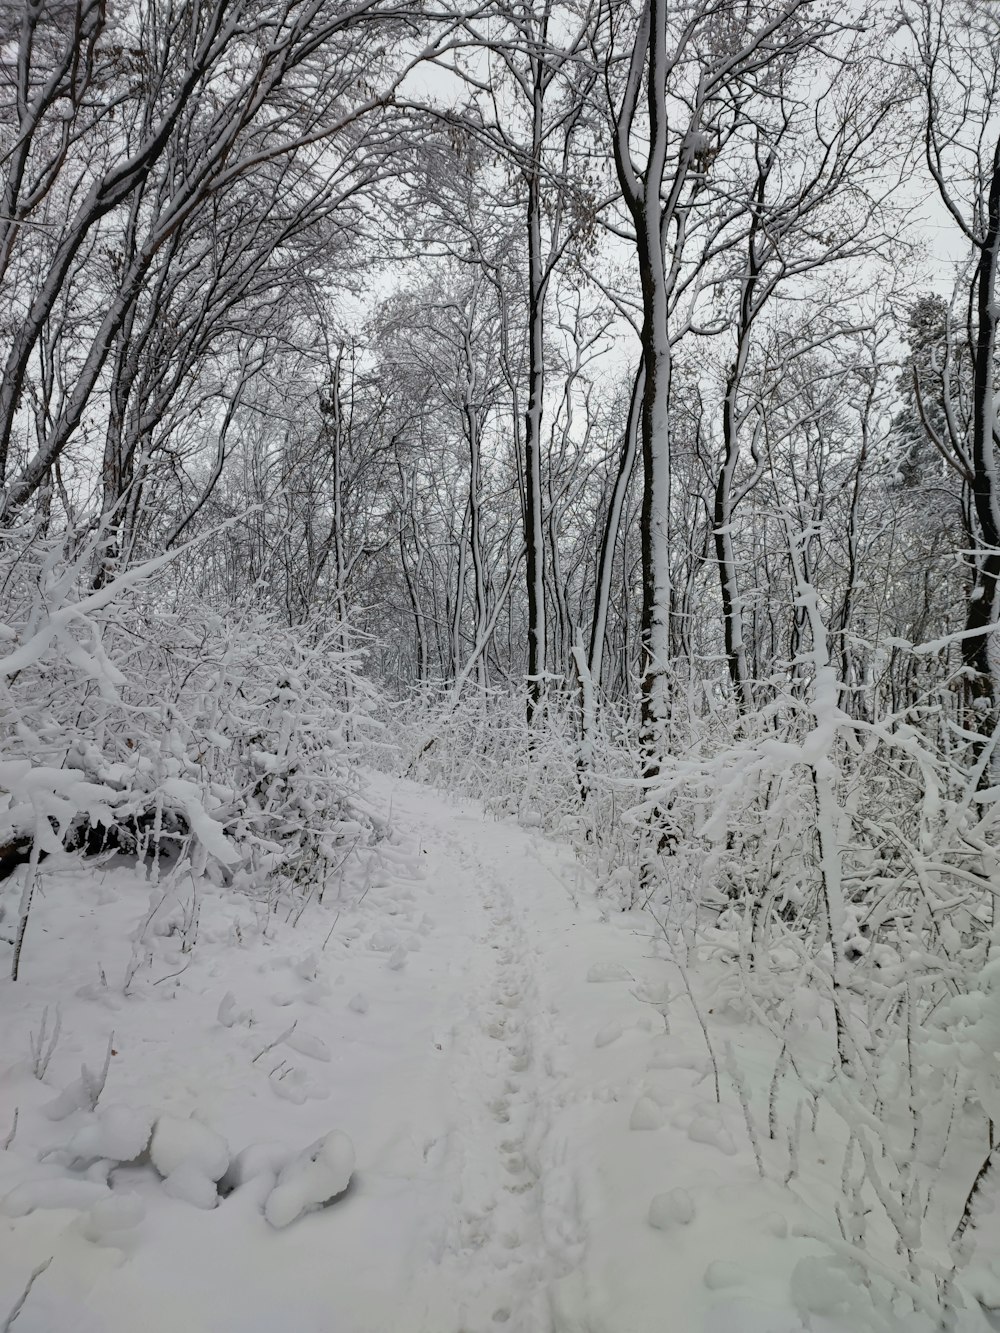 a snowy path through a forest with lots of trees